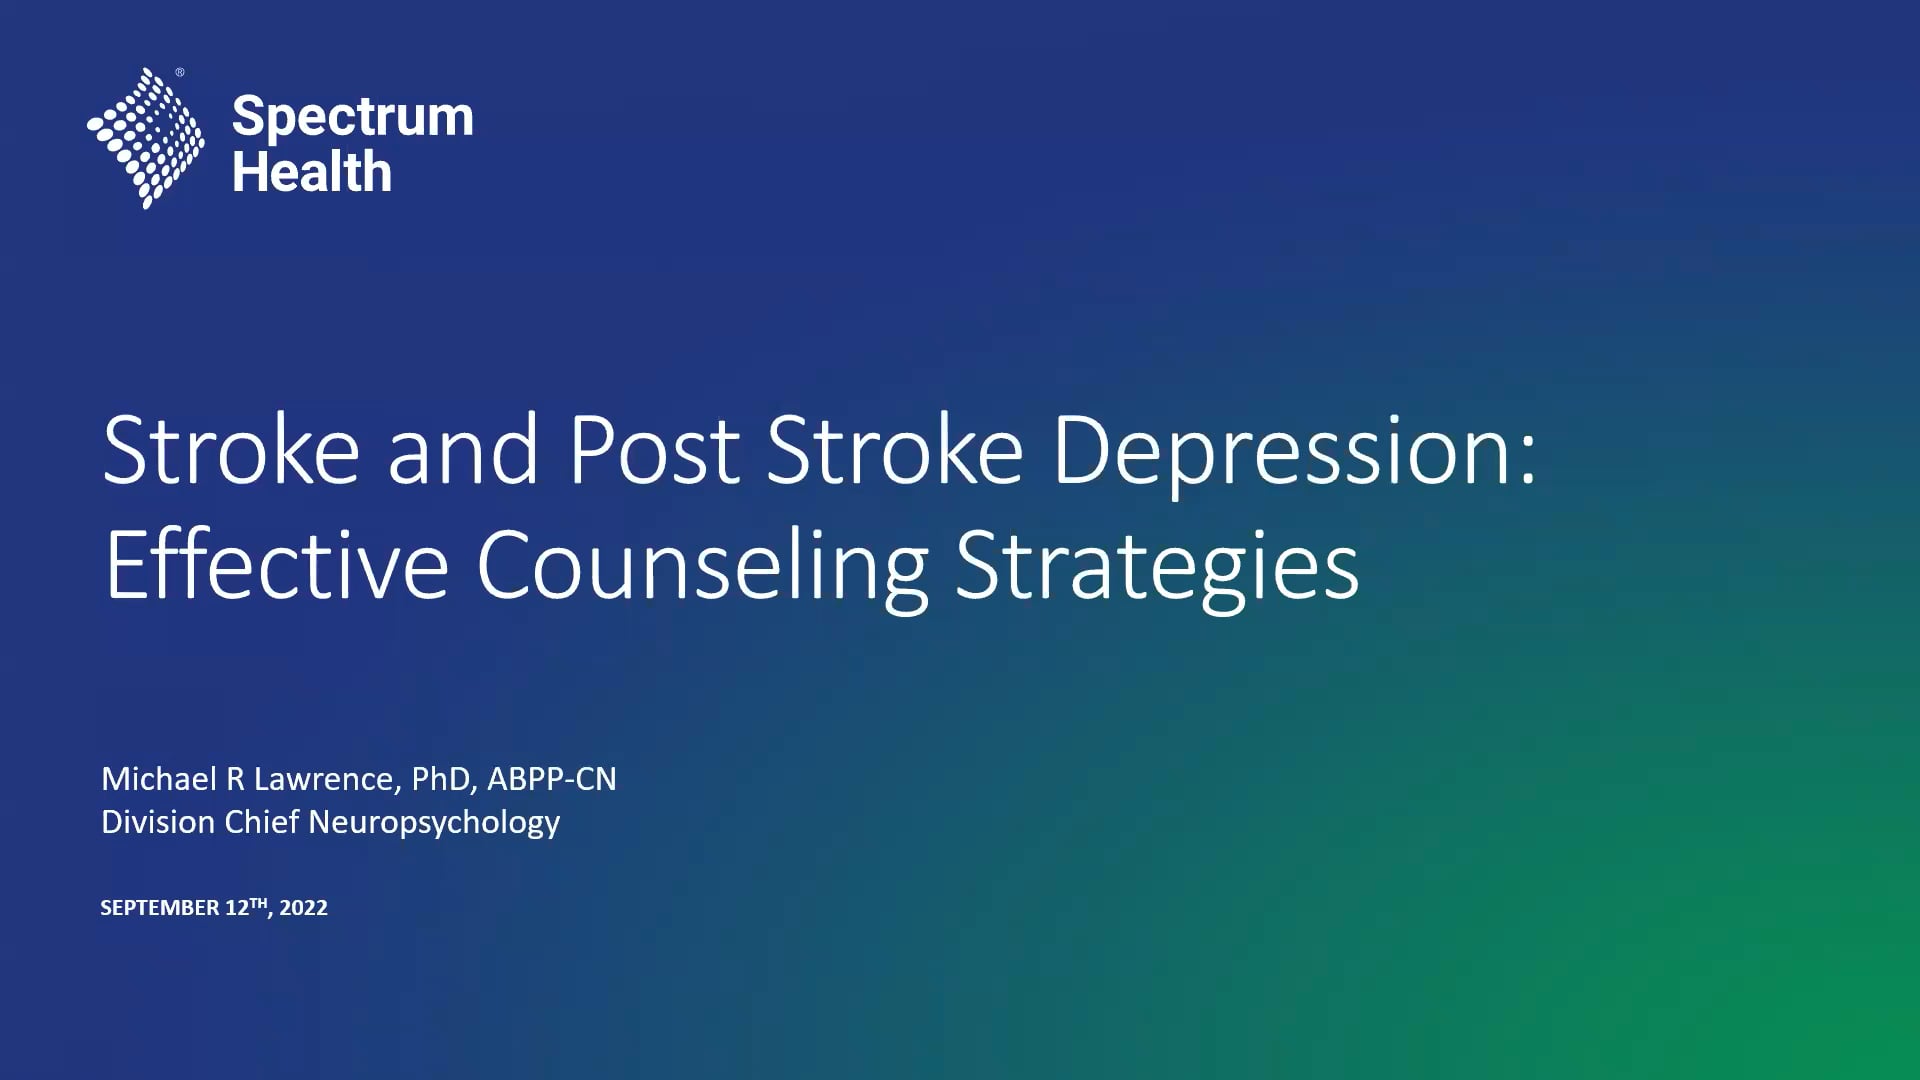 Effective Counseling Strategies